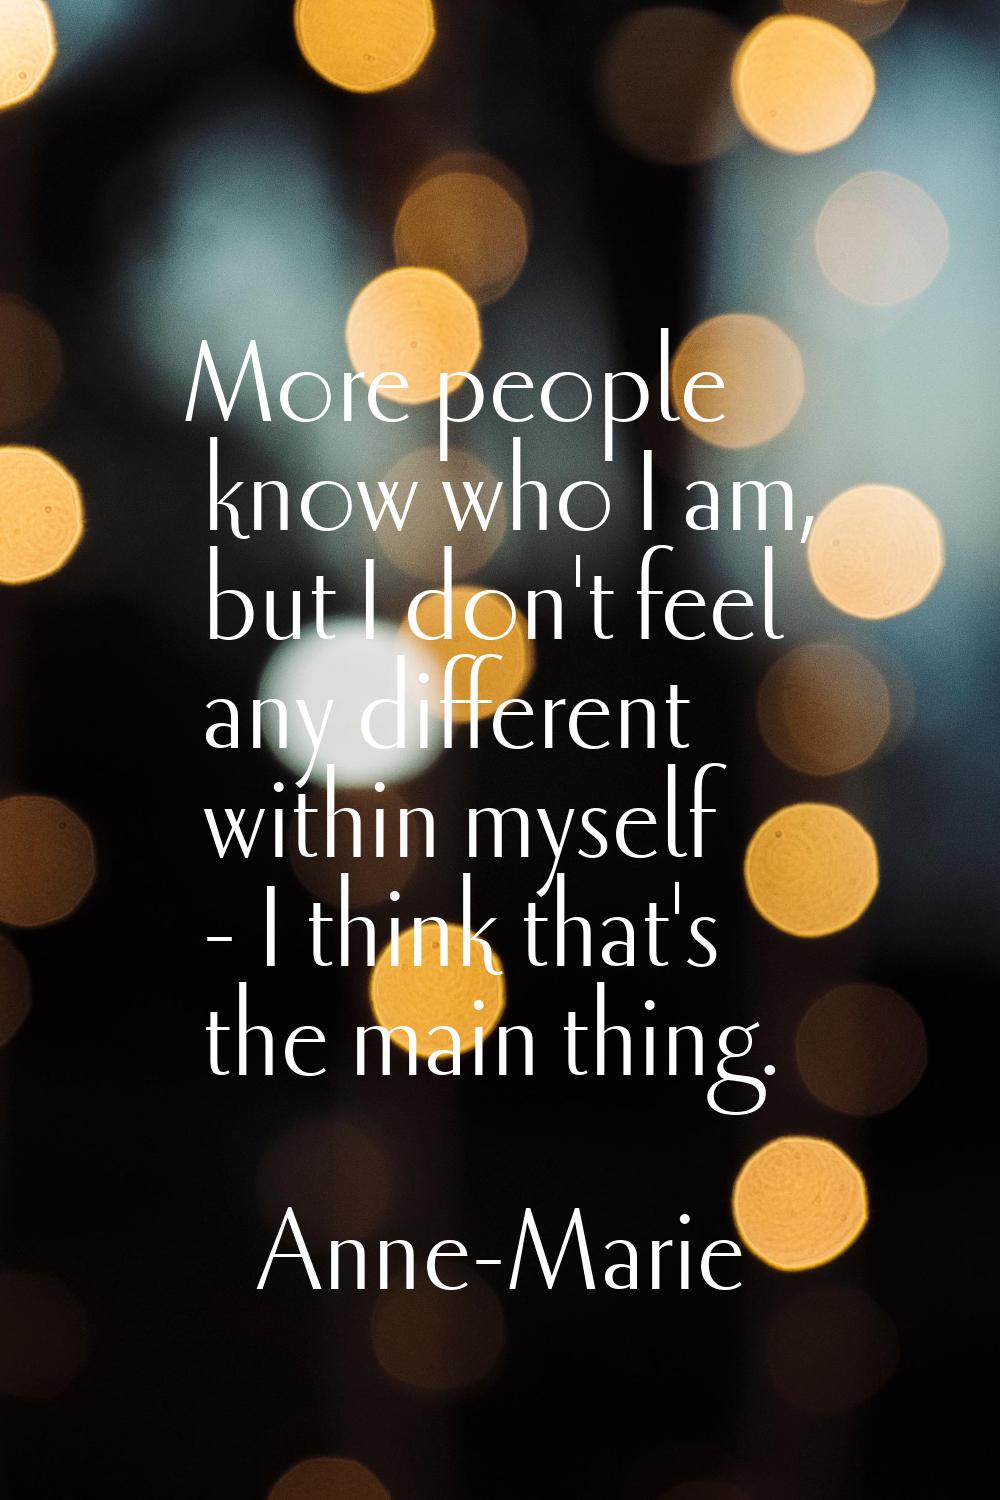 More people know who I am, but I don't feel any different within myself - I think that's the main t